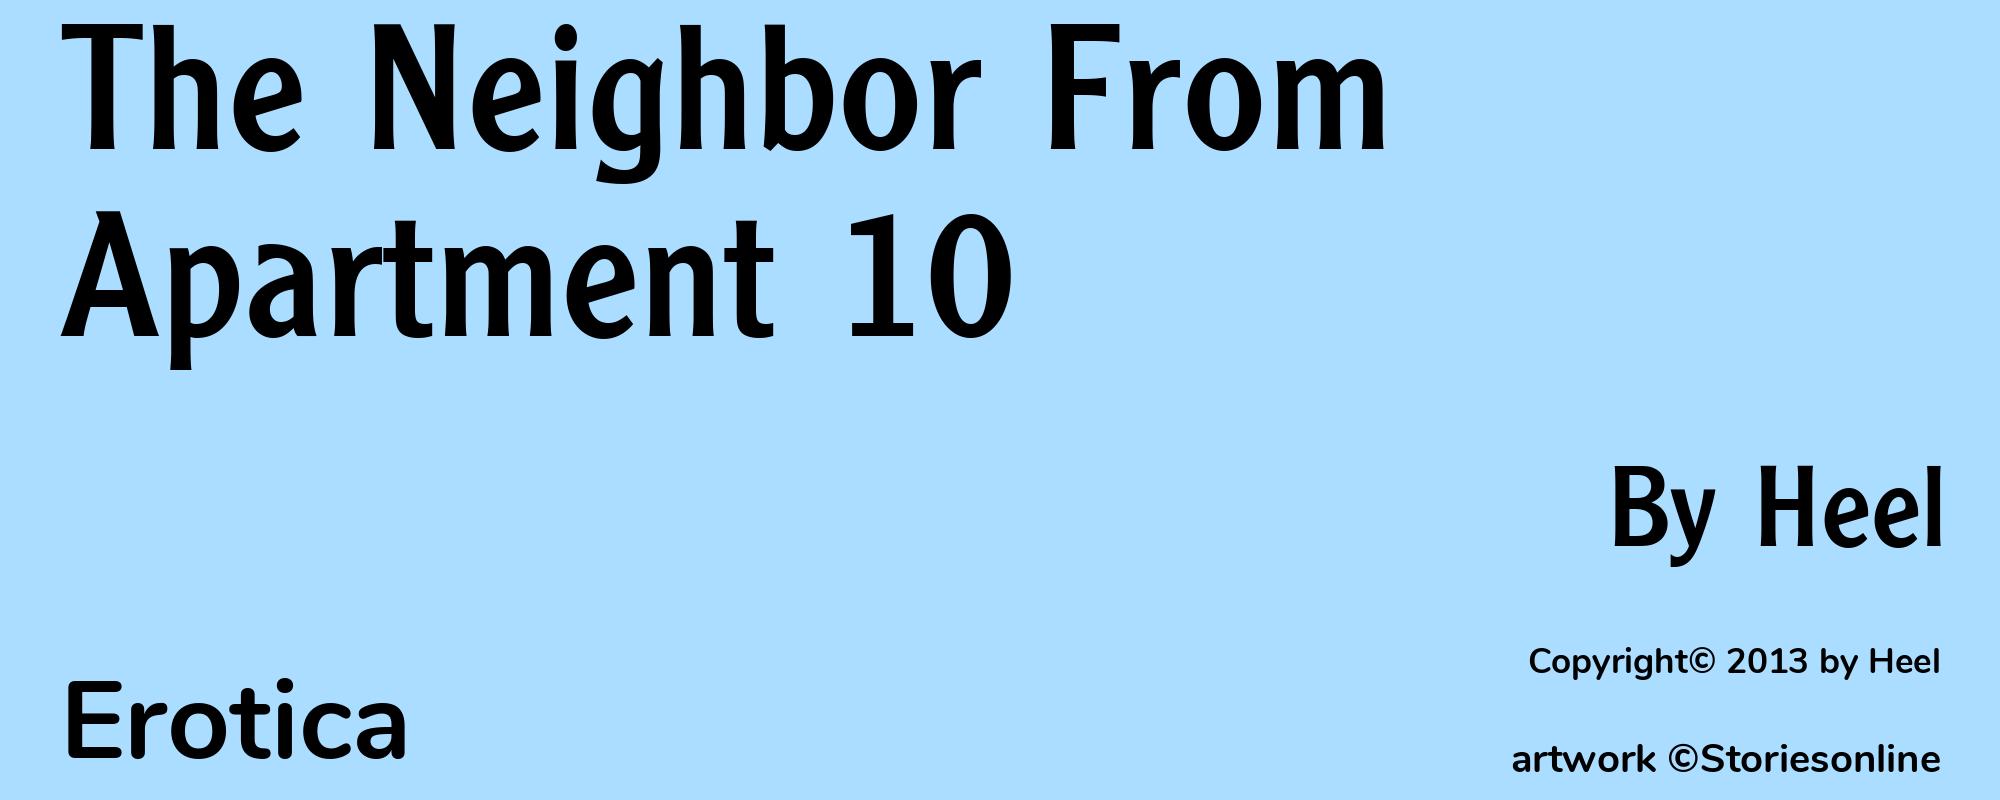 The Neighbor From Apartment 10 - Cover